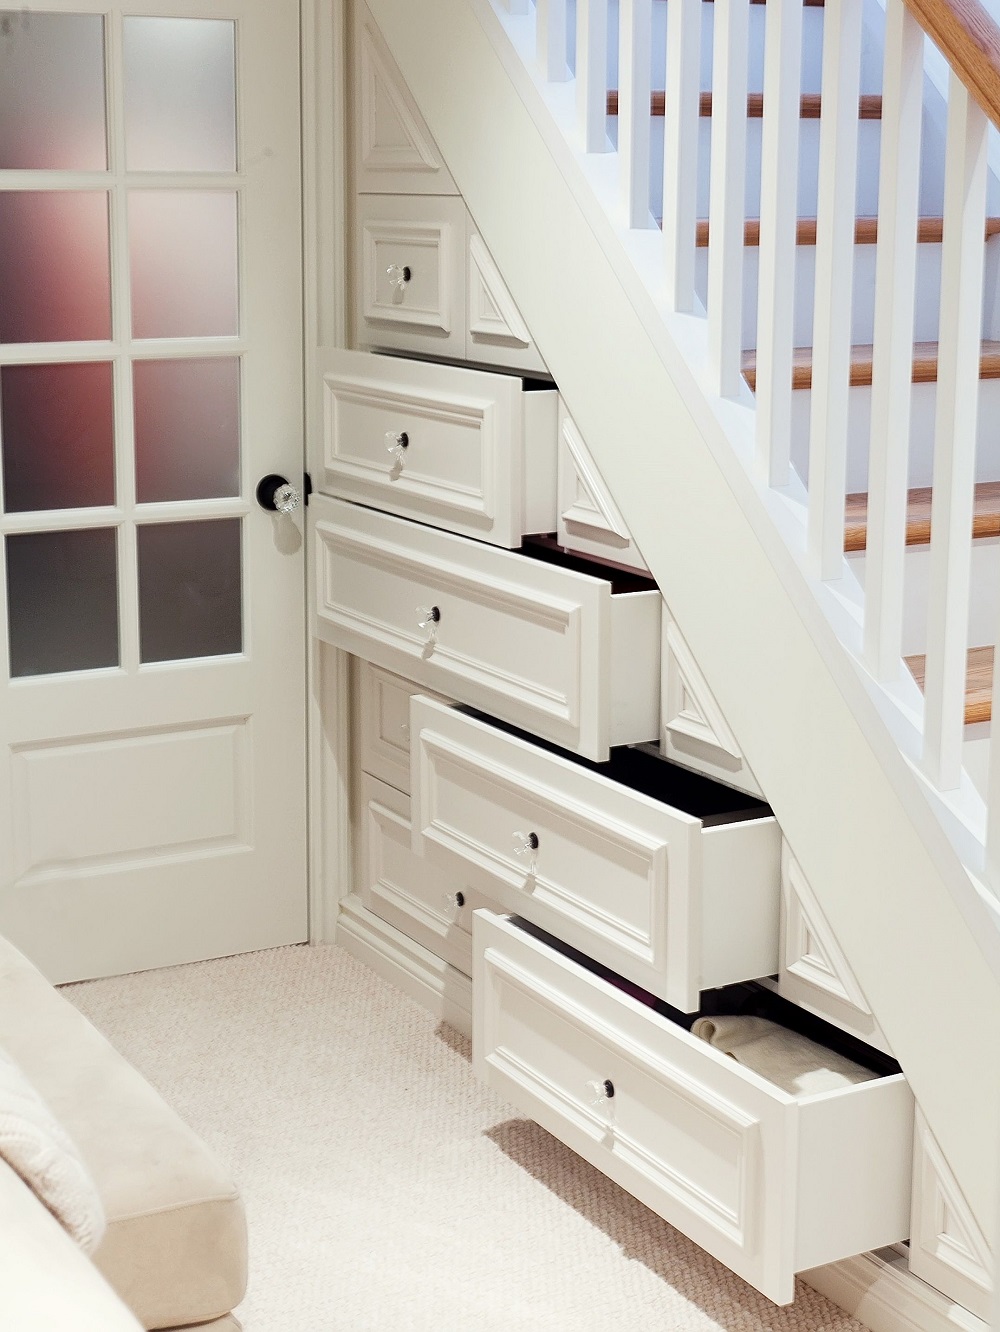 t2-65 Storage ideas in the basement to help you organize your space